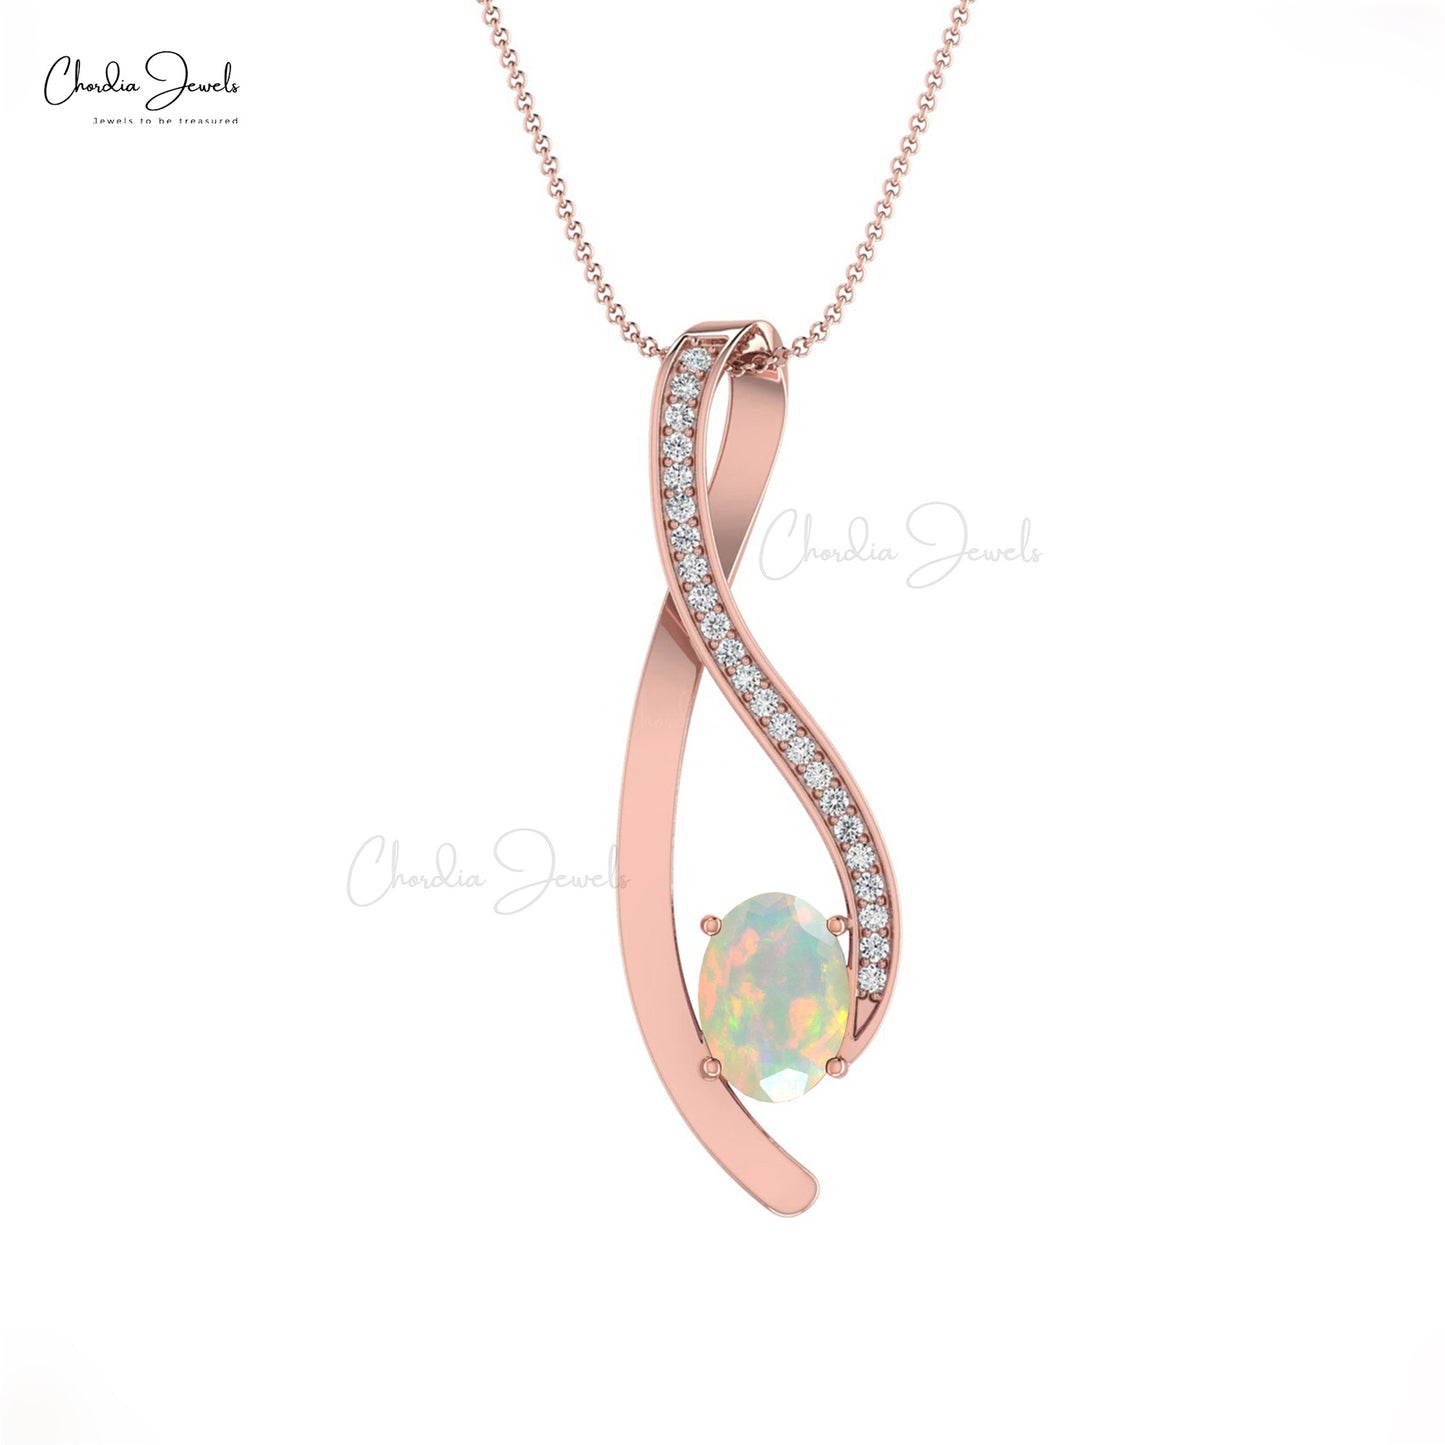 Authentic Fire Opal 6x4mm Oval Cut 4-Prong Set Gemstone Overlay Curve Pendant Necklace 14k Solid Gold April Birthstone Diamond Wedding Jewelry For Her